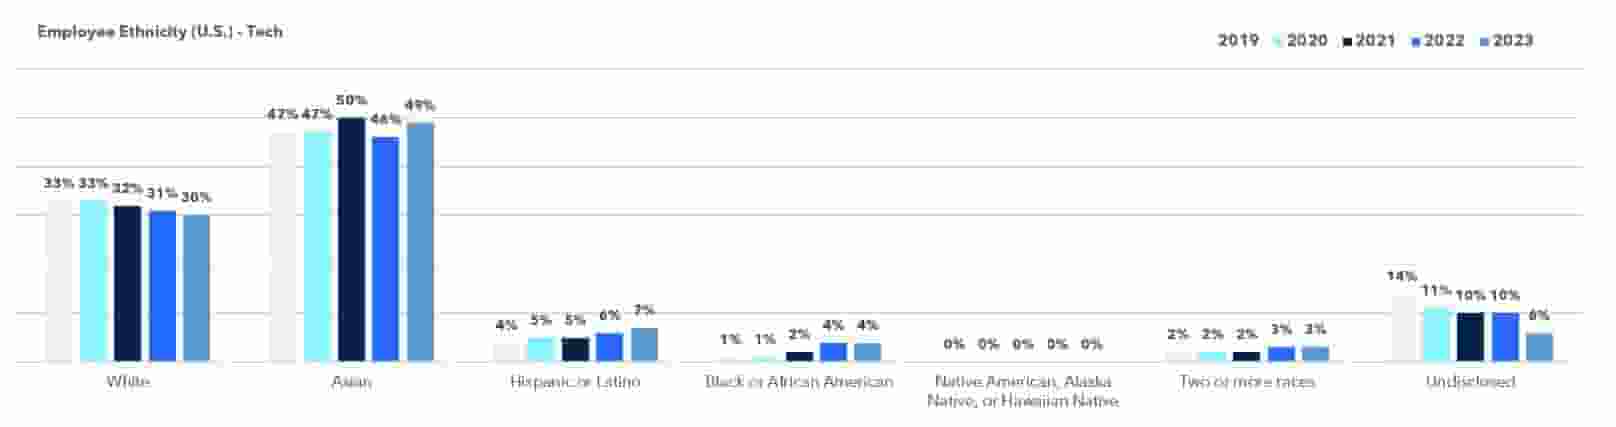 Overall Ethnicity Data in Tech Roles for 2023